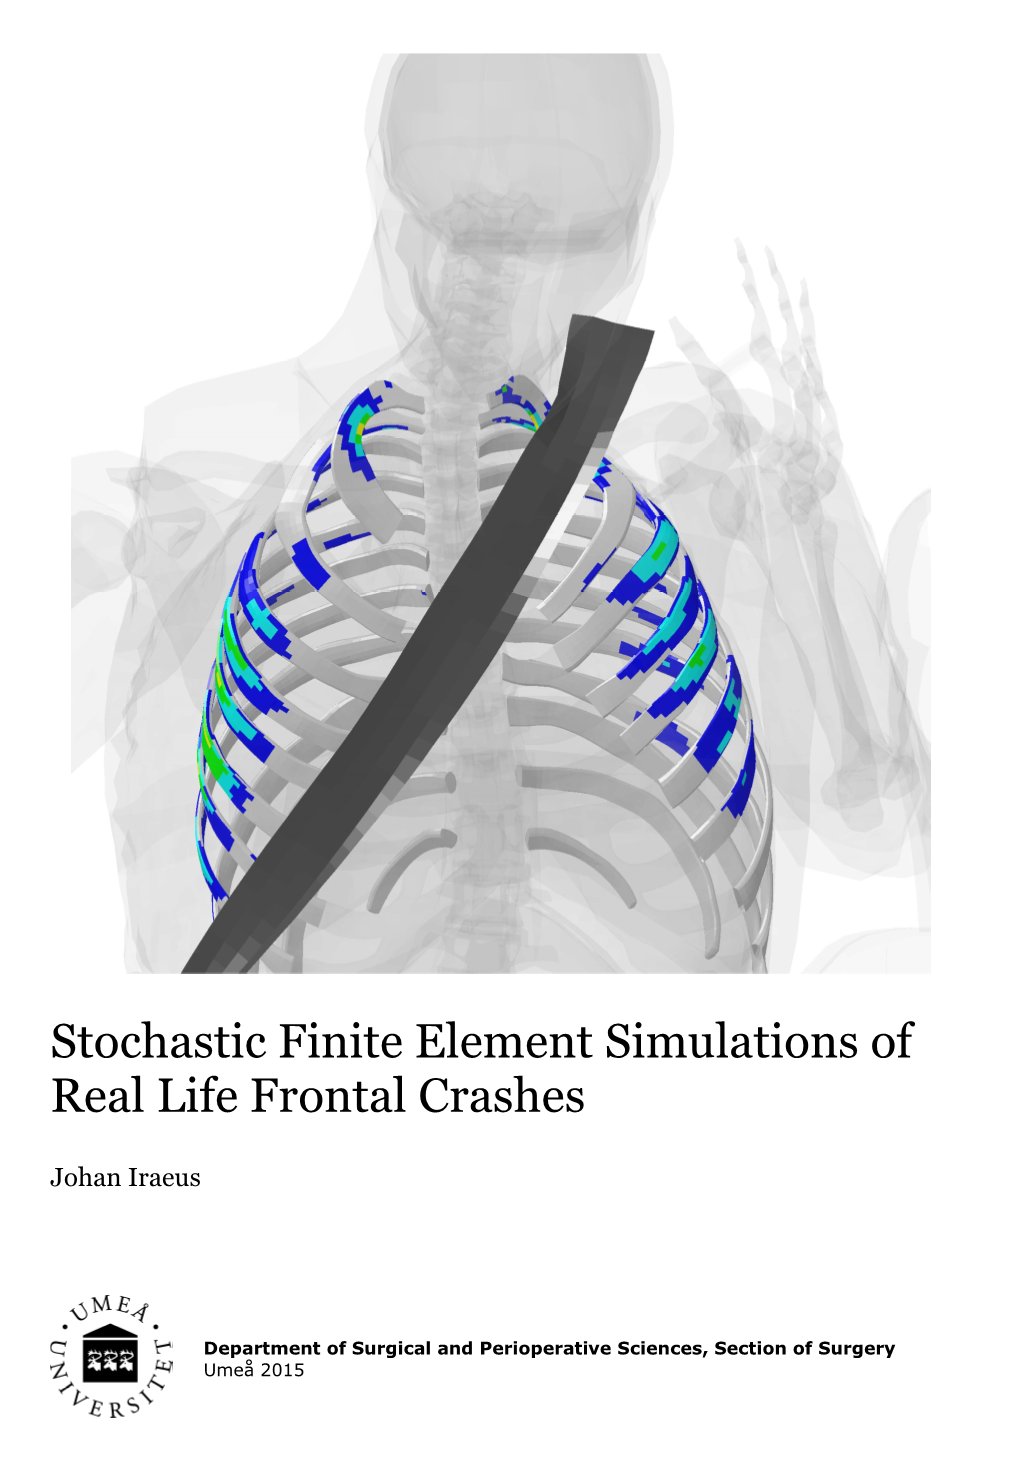 Stochastic Finite Element Simulations of Real Life Frontal Crashes